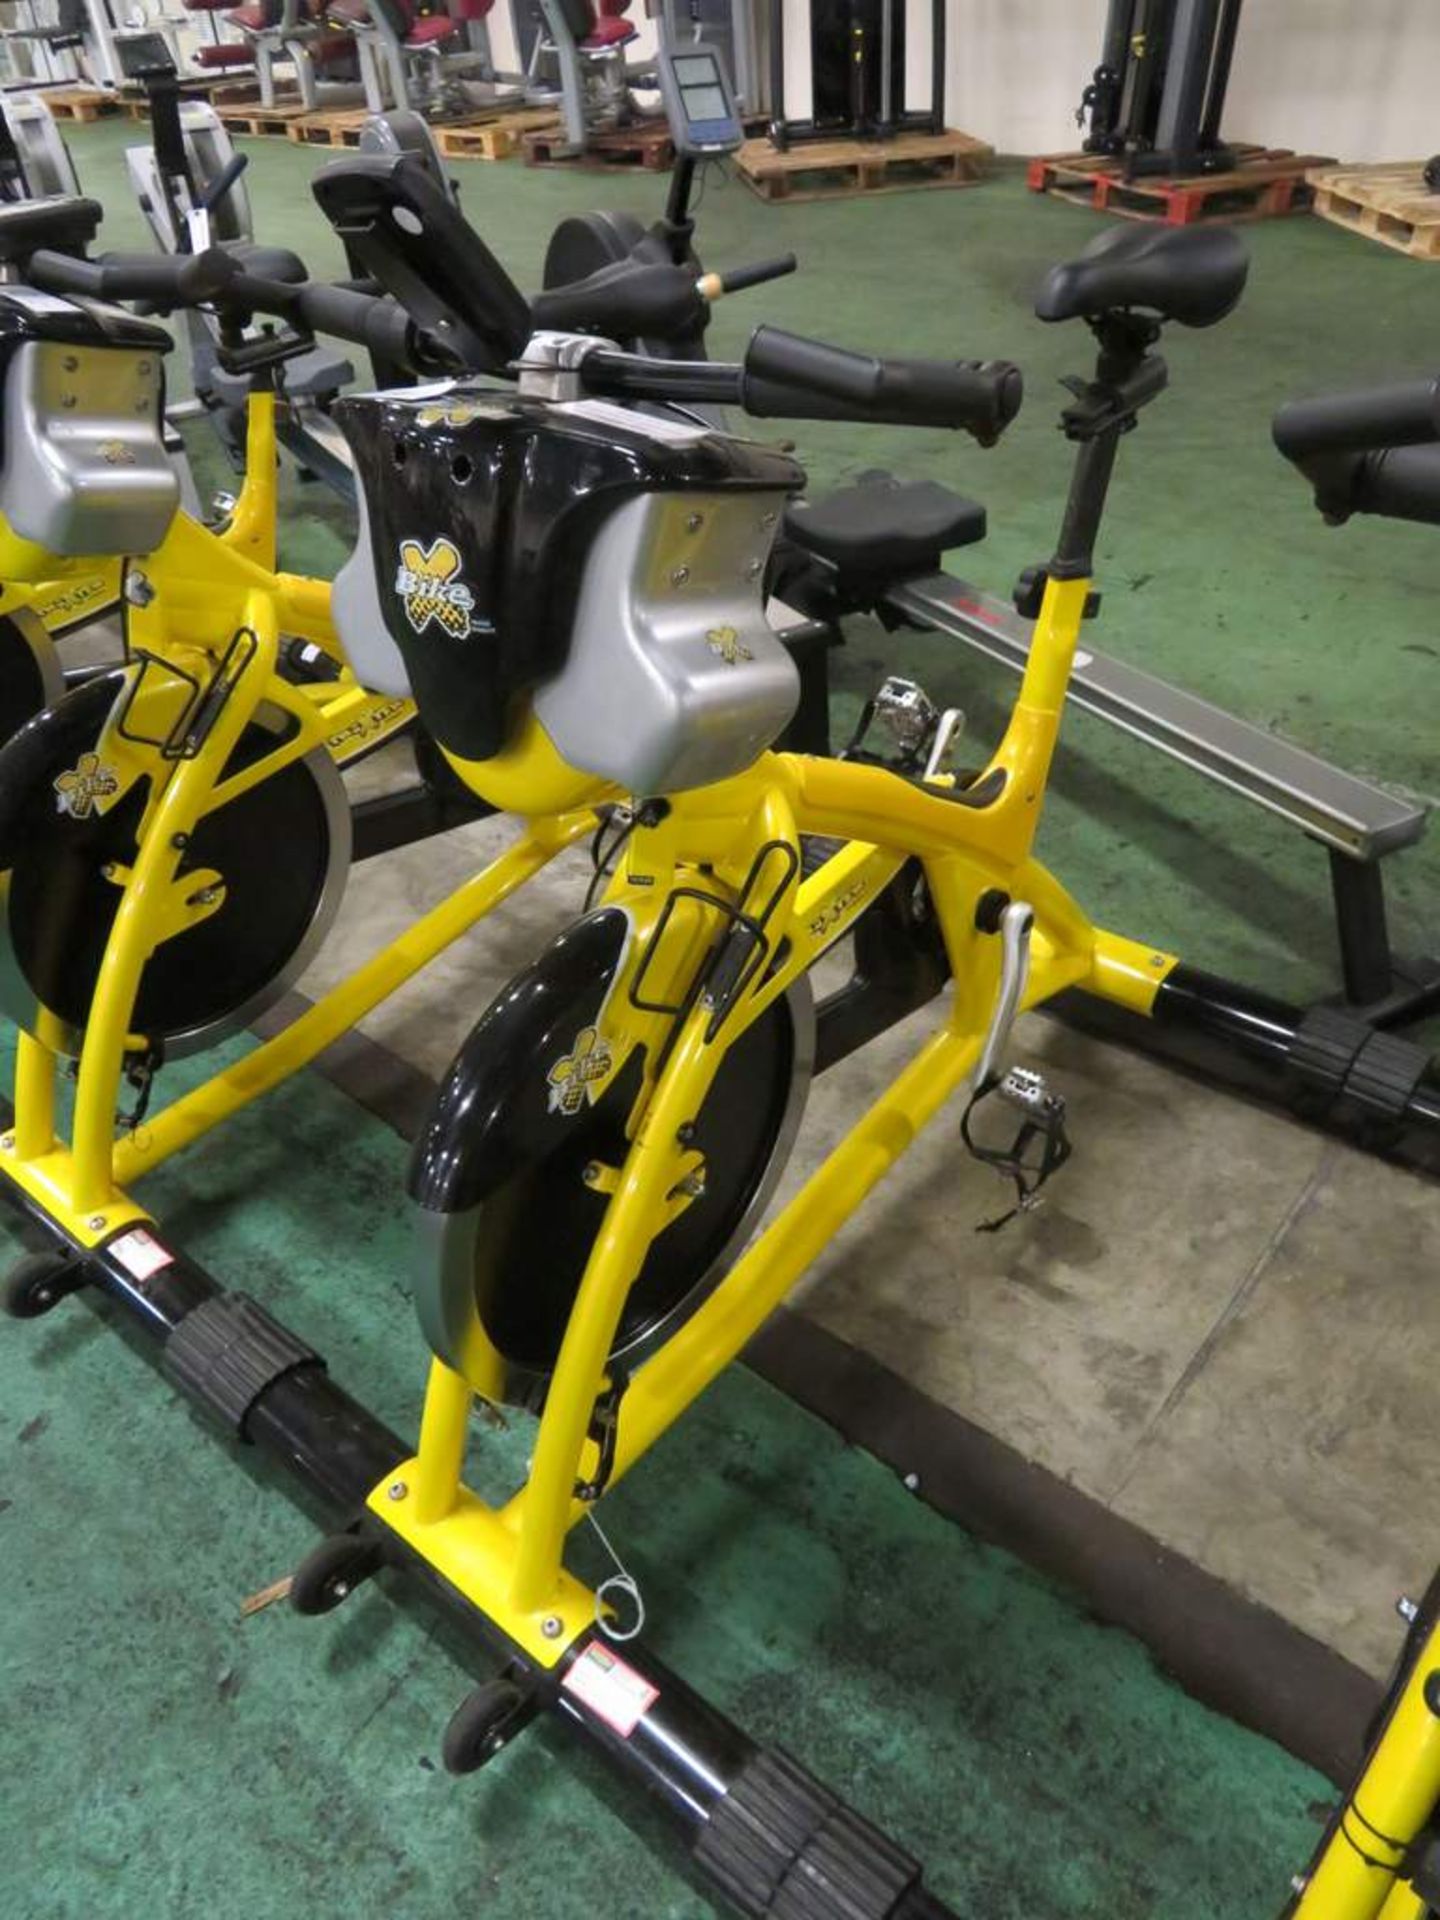 4x Trixter Enabled Exercise Bike, Complete With Pulse Fitness Digital Console. - Image 2 of 7